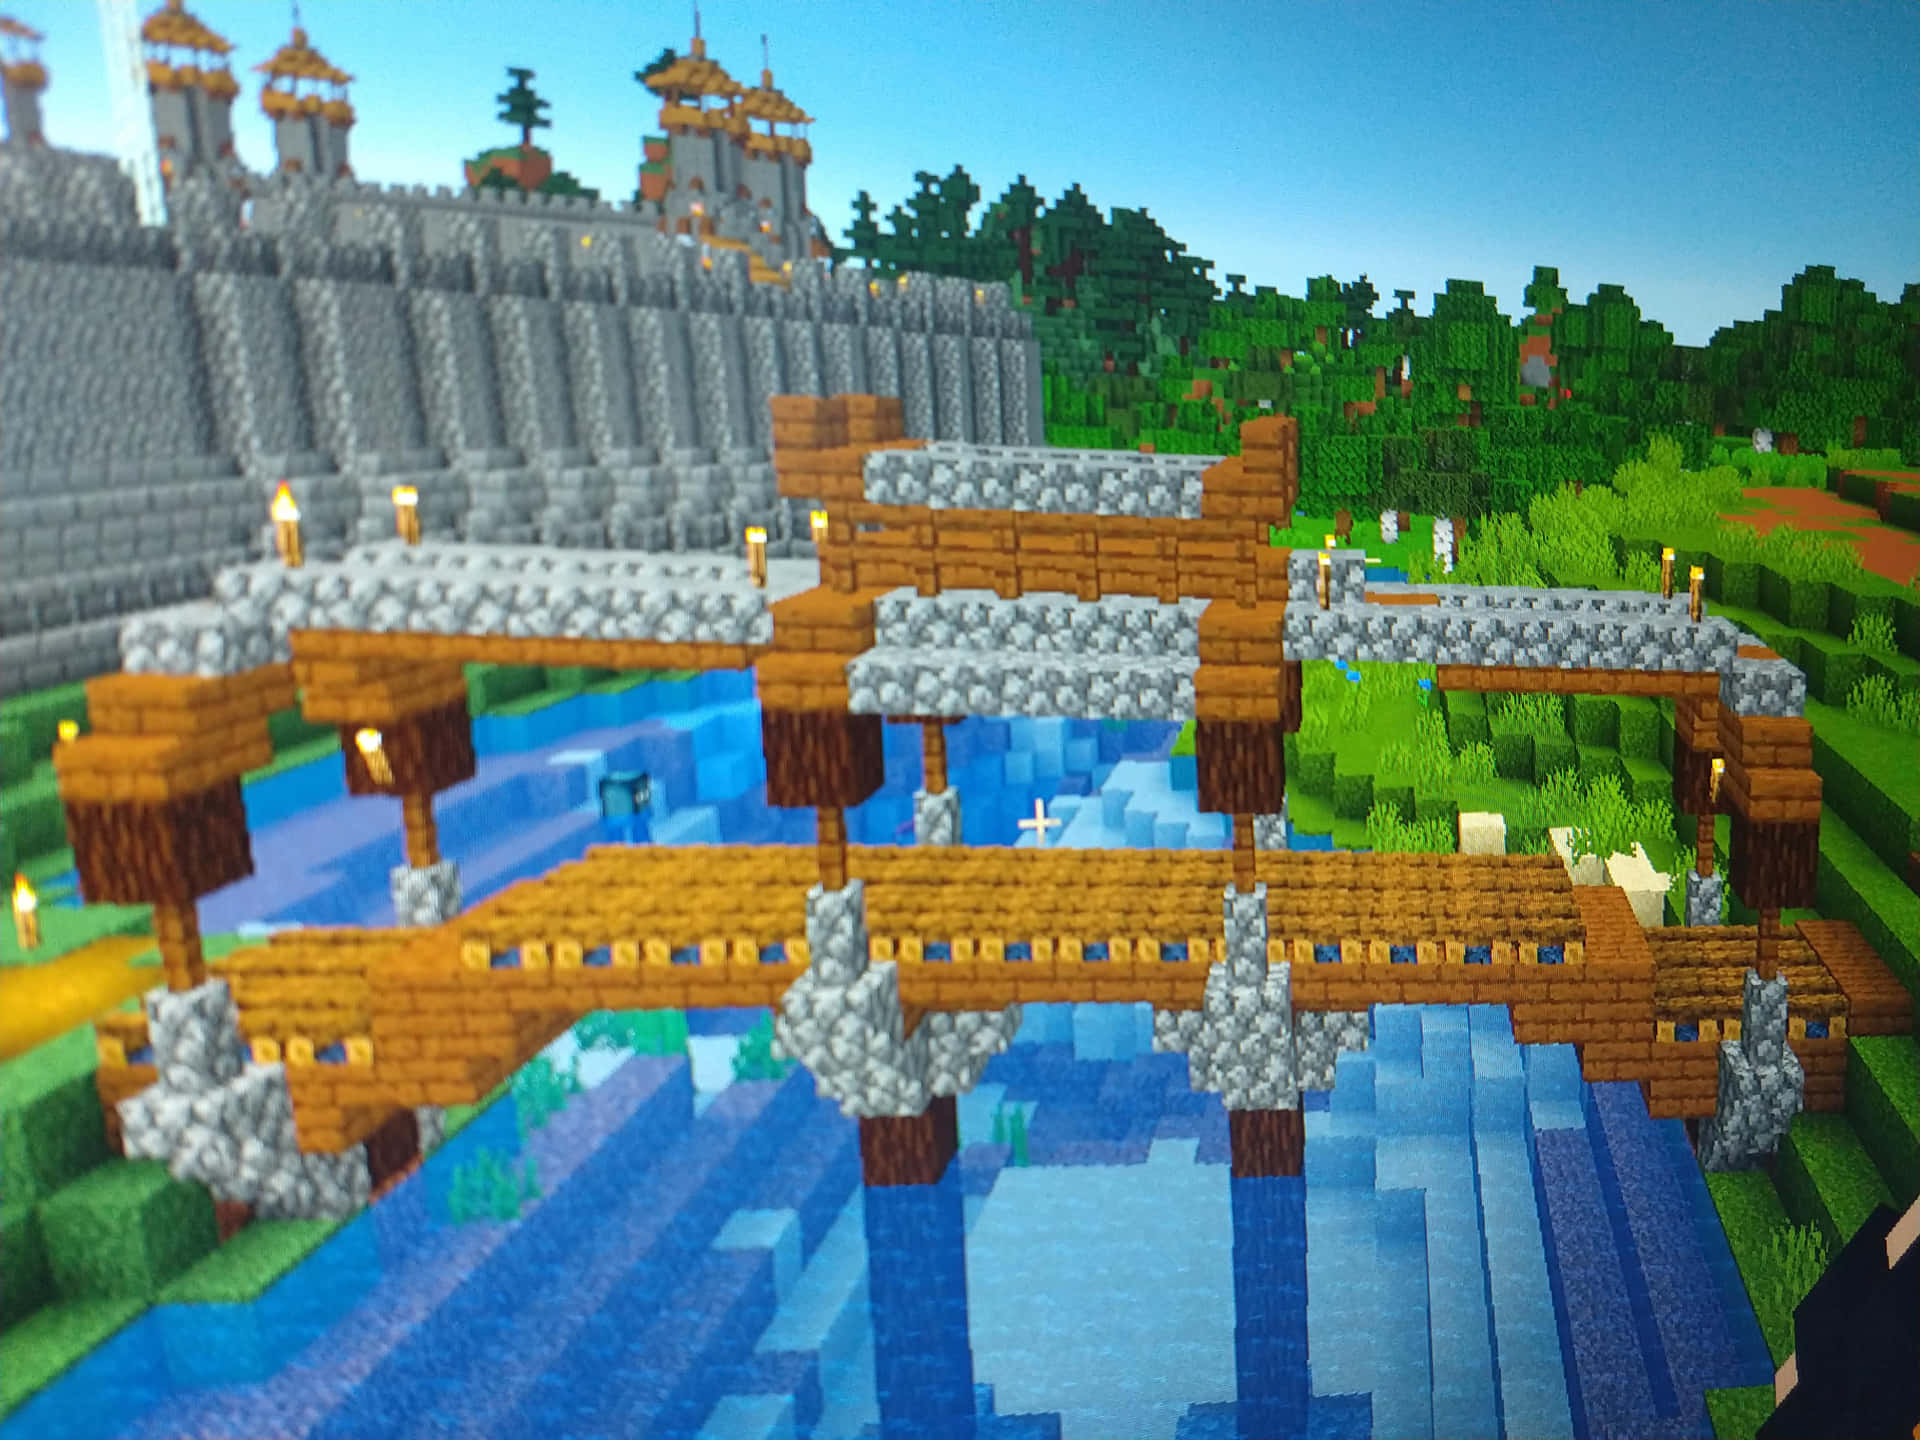 Spectacular Minecraft Bridges with Scenic Background in High-Resolution Wallpaper